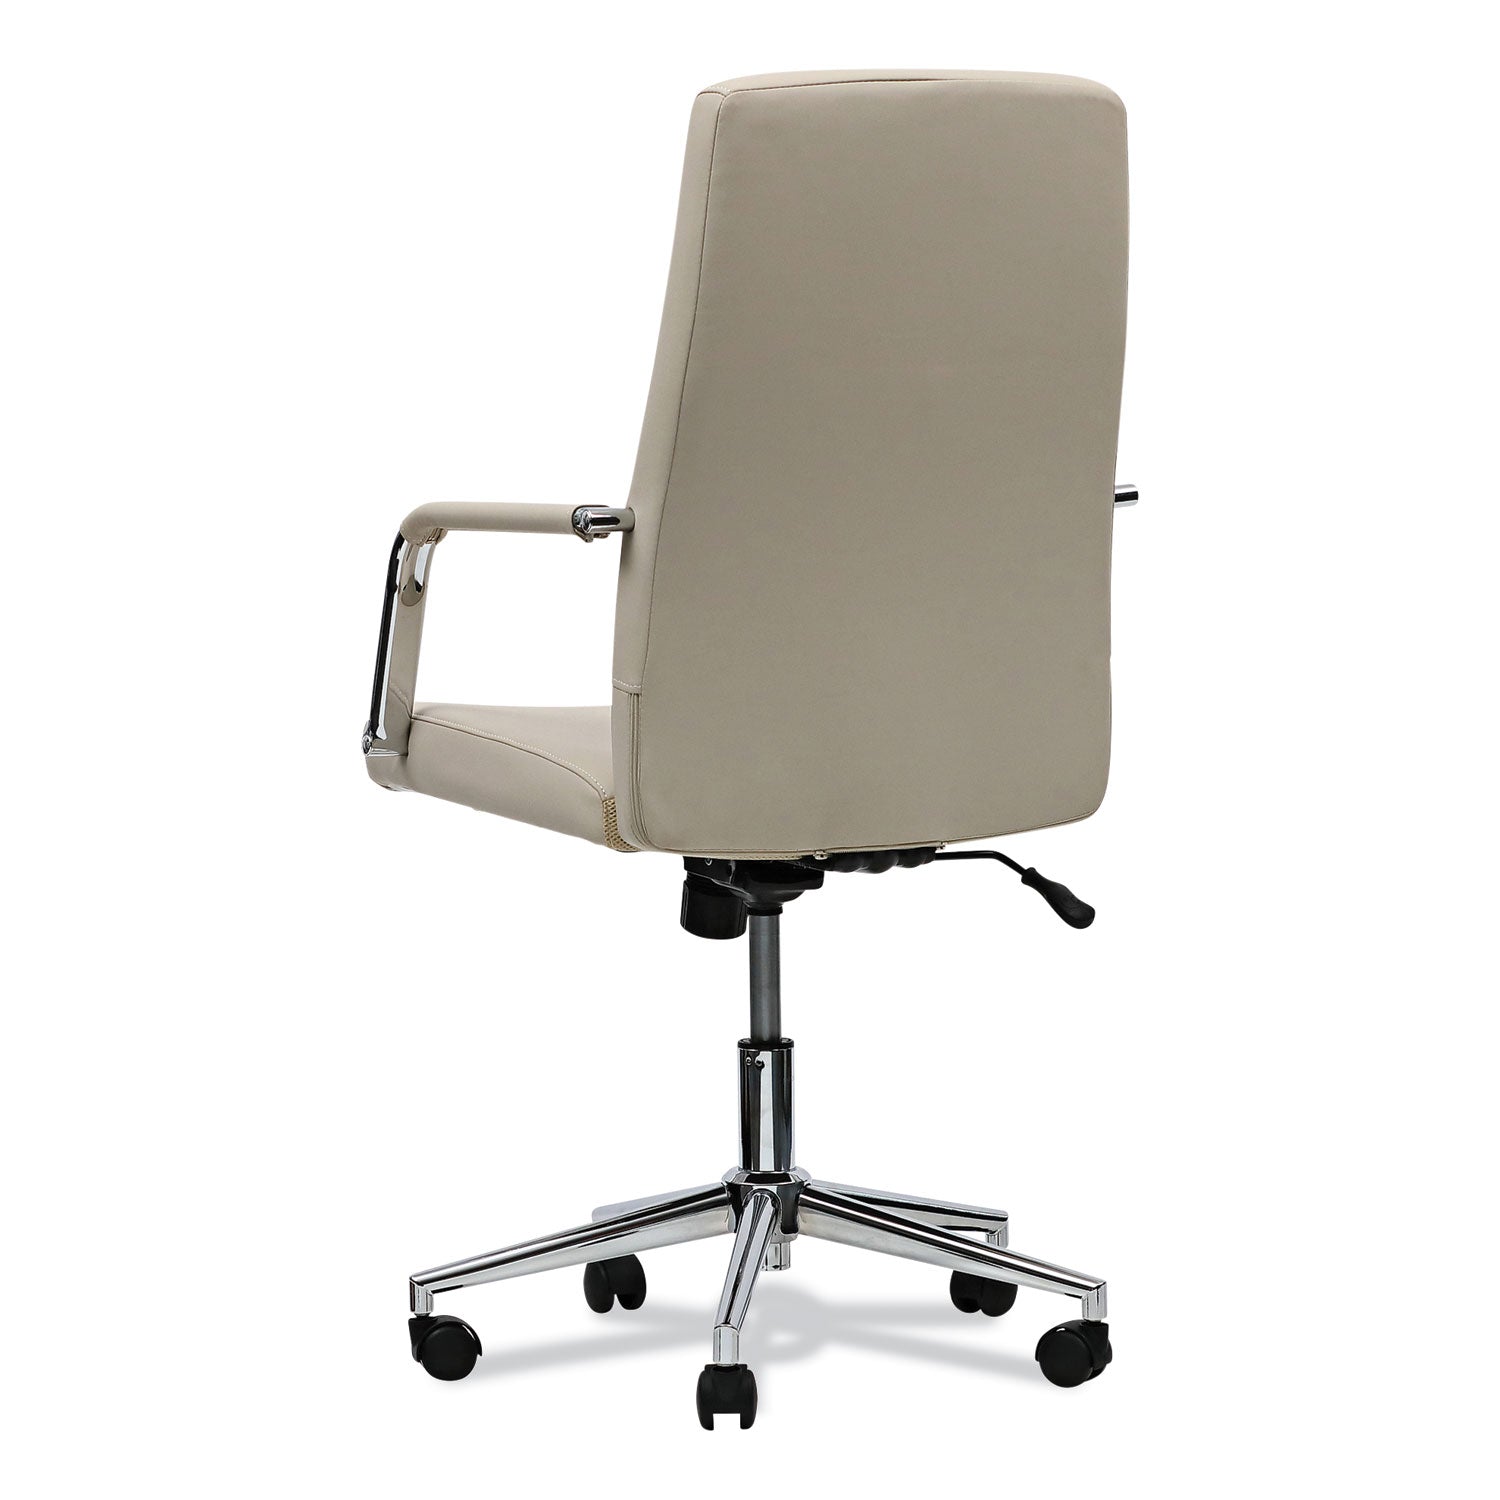 leather-task-chair-supports-up-to-275-lb-1819-to-2193-seat-height-white-seat-white-back_alews4106 - 5